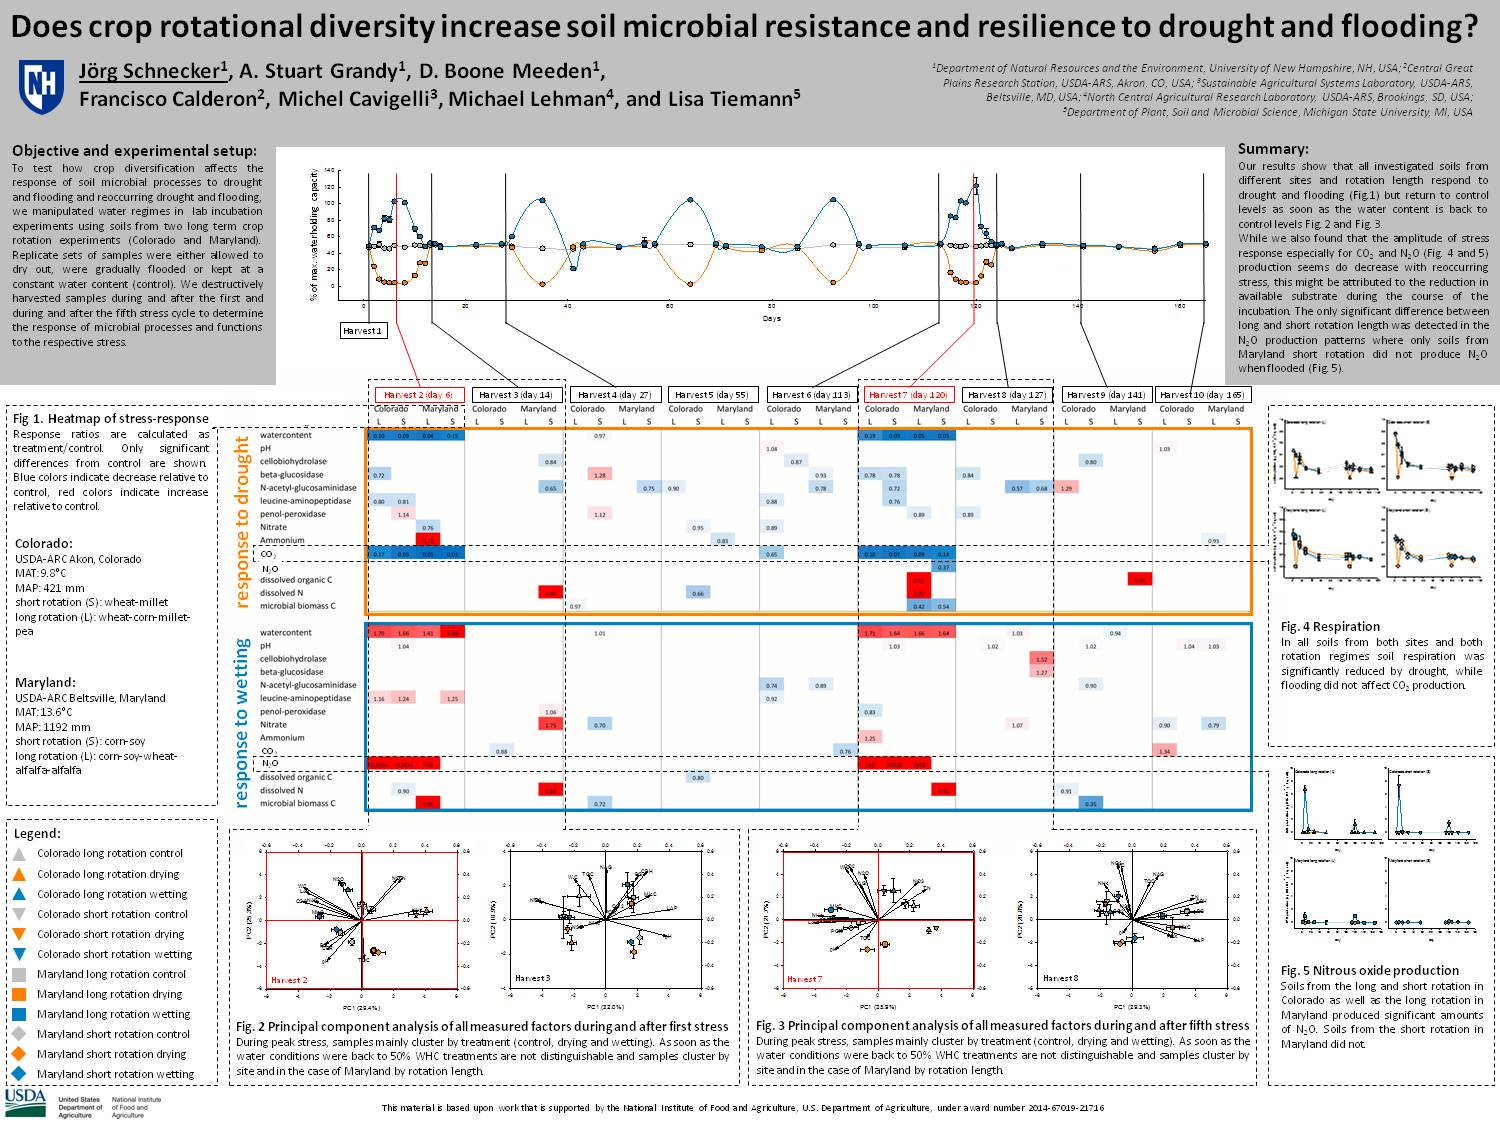 Does Crop Rotational Diversity Increase Soil Microbial Resistance And Resilience To Drought And Flooding? by Joerg_Schnecker